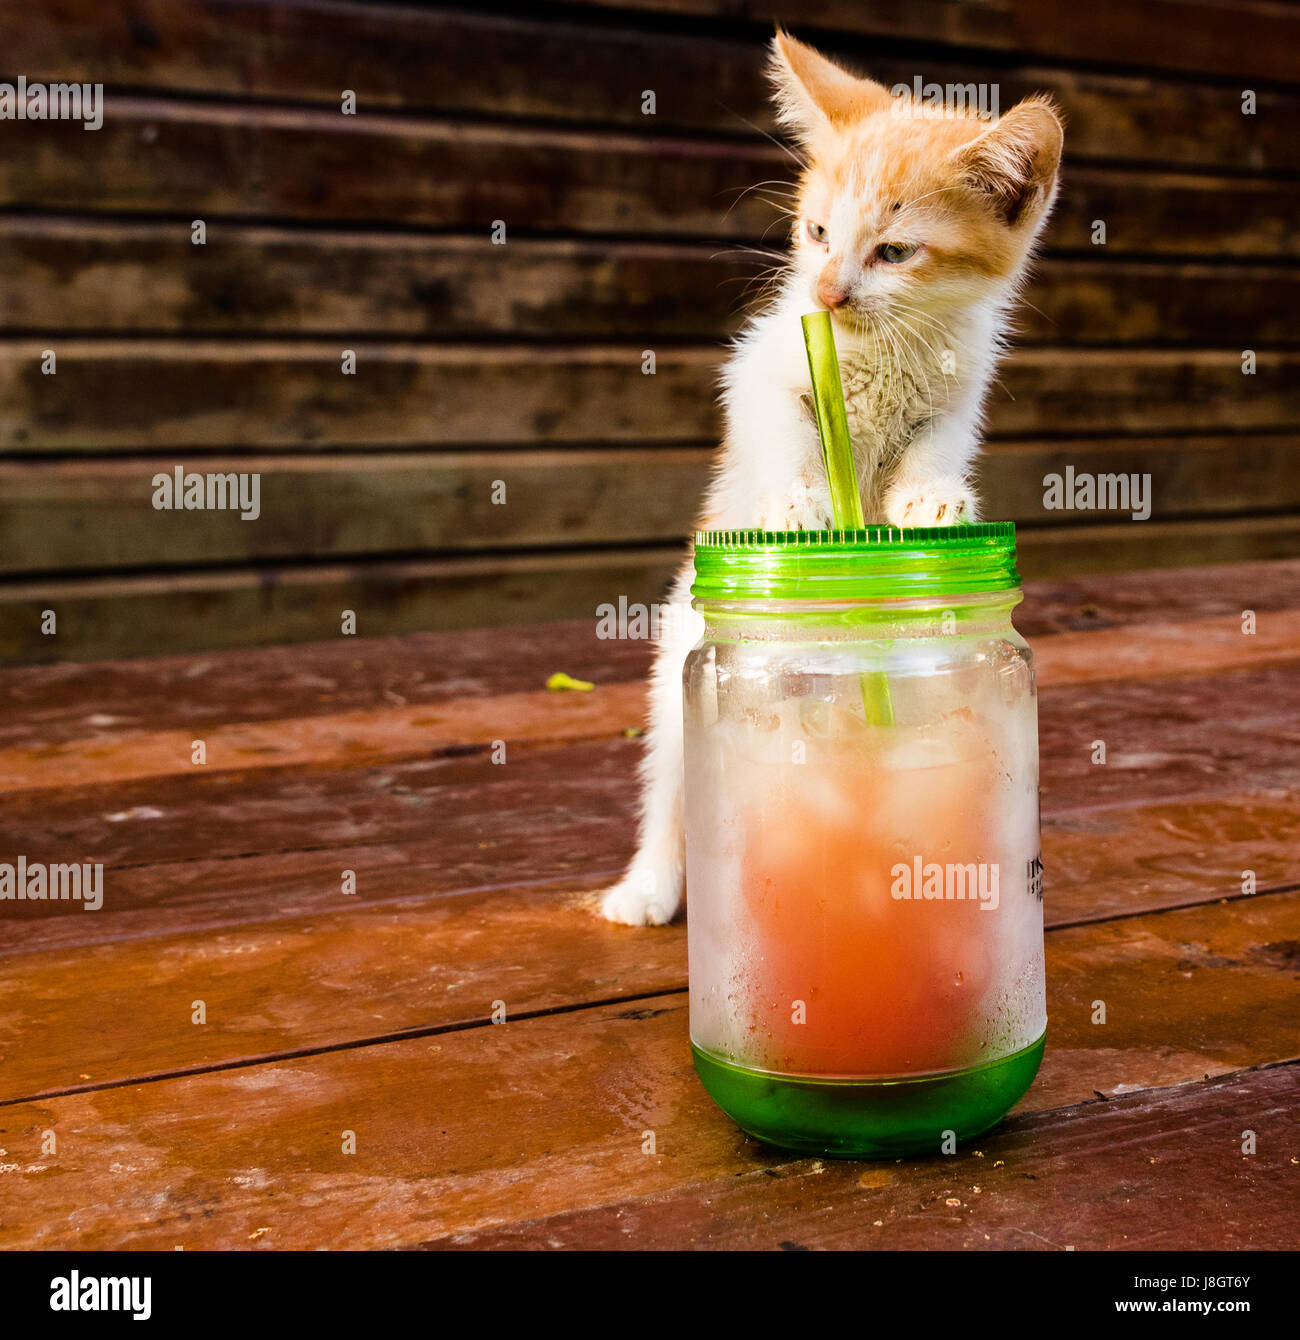 Tabby Kitten Playing With Cup Stock Photo